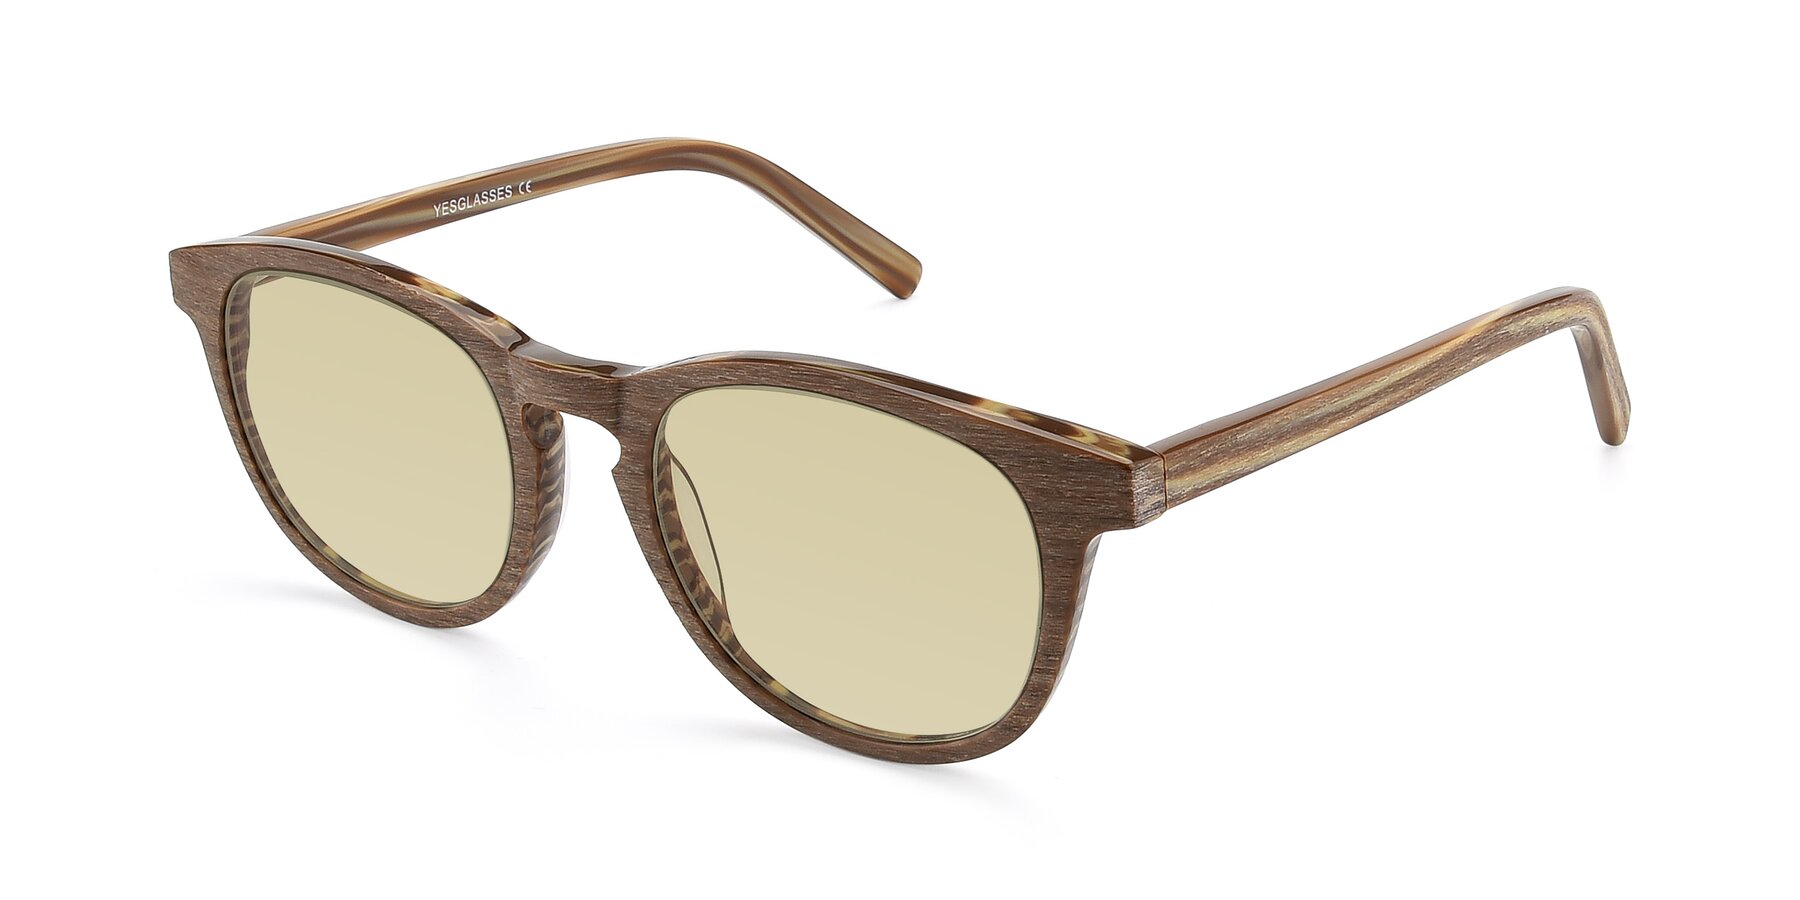 Angle of SR6044 in Brown-Wooden with Light Champagne Tinted Lenses